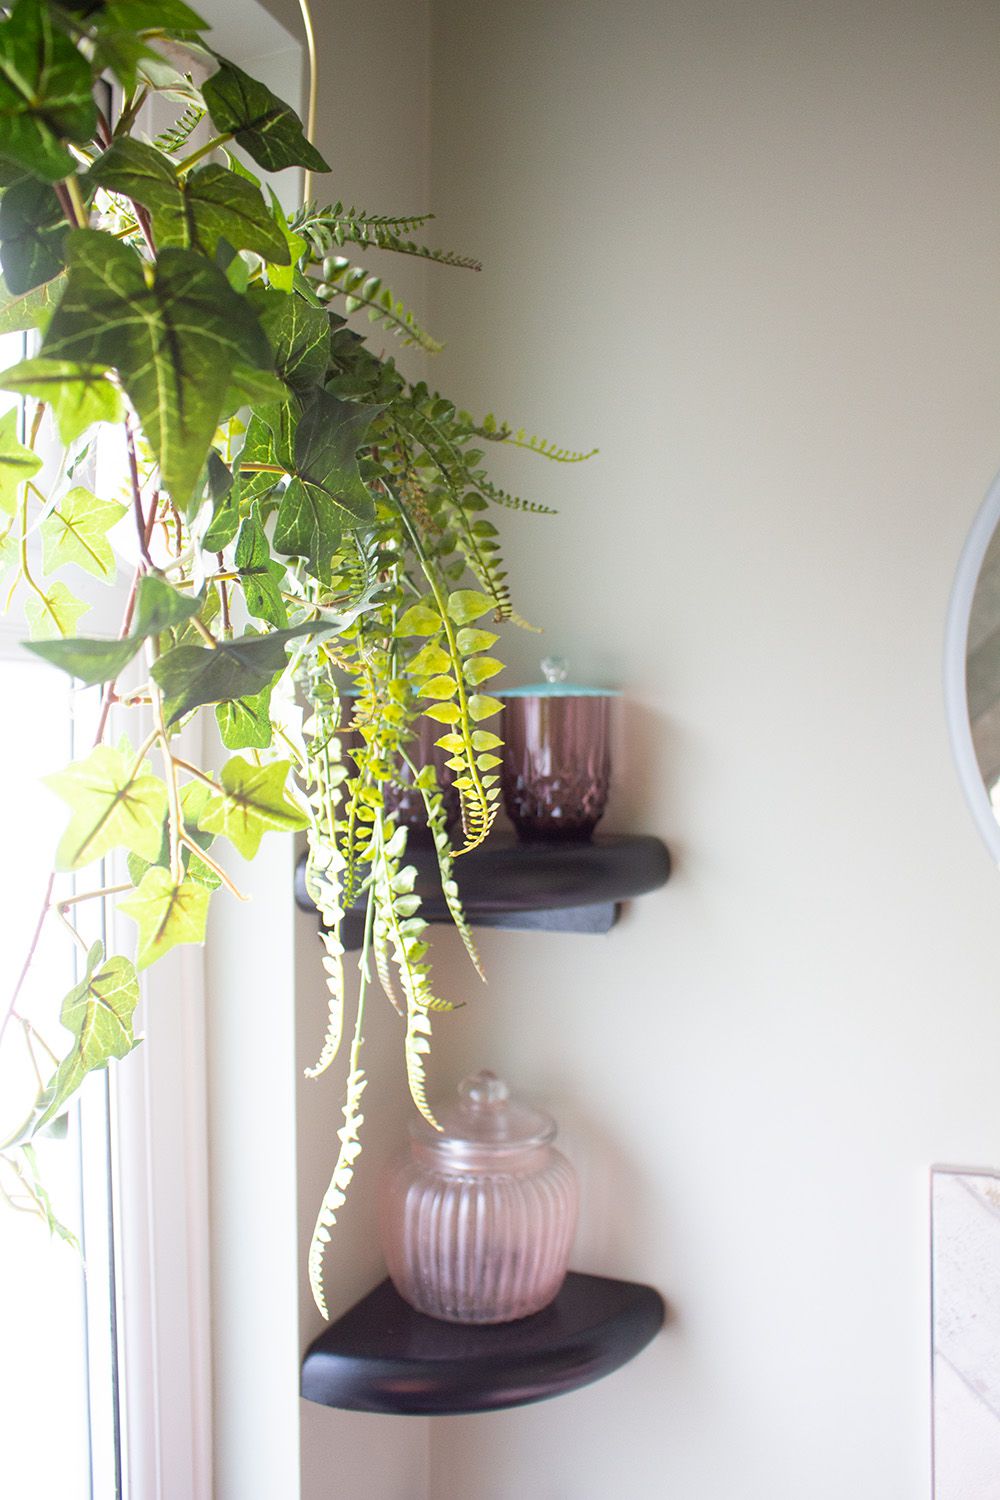 A photo of the en suite window with hanging plants as a window dressing.